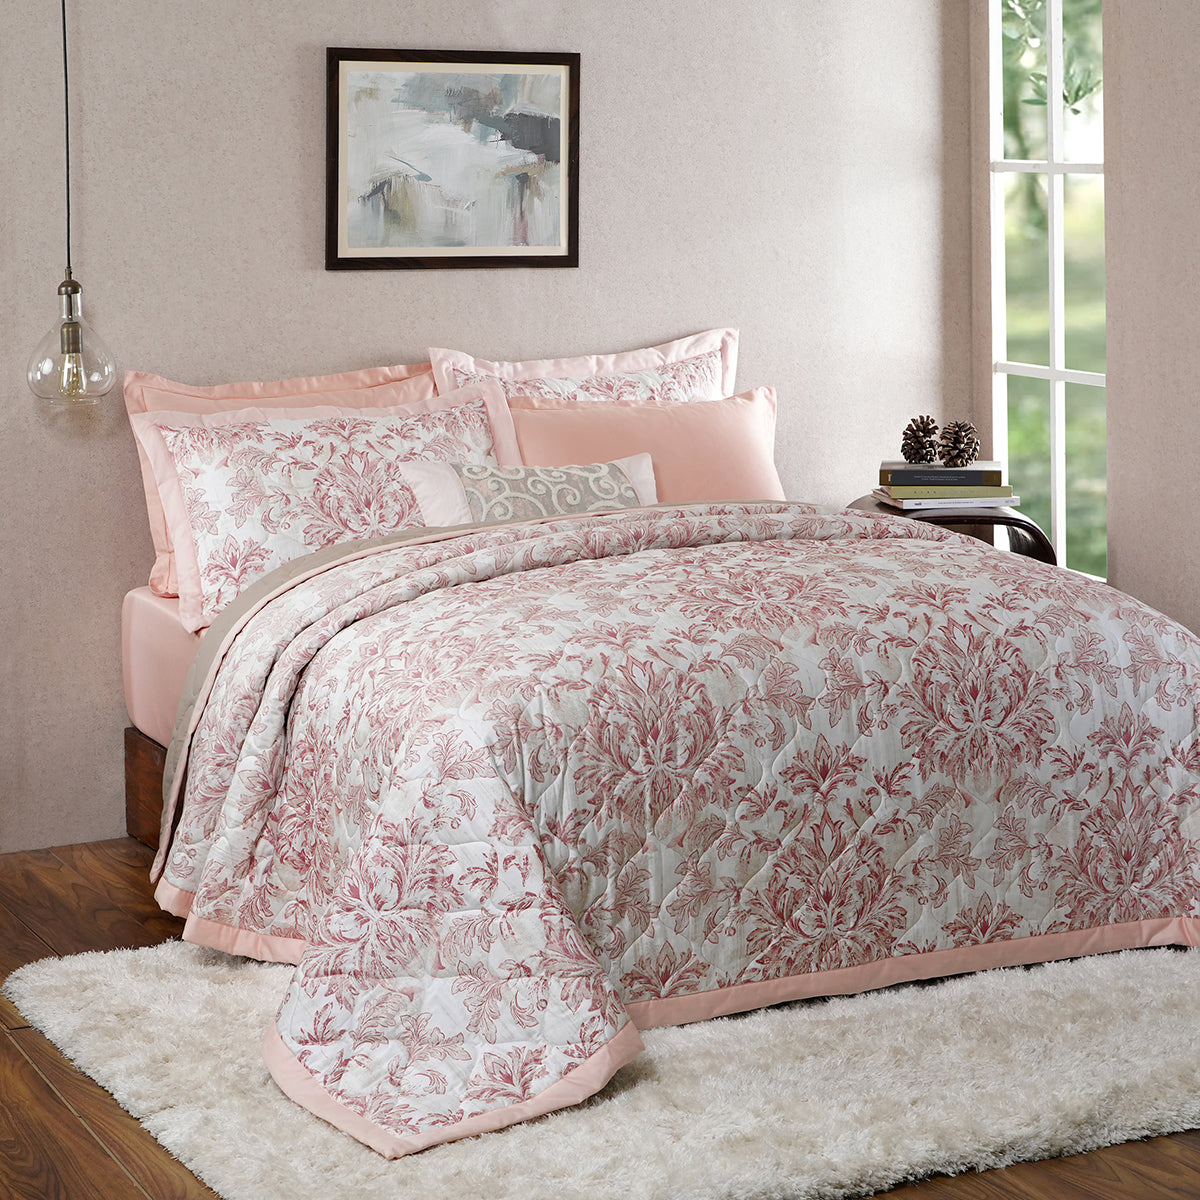 Tranquil Essence Napery Classic Peach 8 PC Quilt/Quilted Bed Cover Set